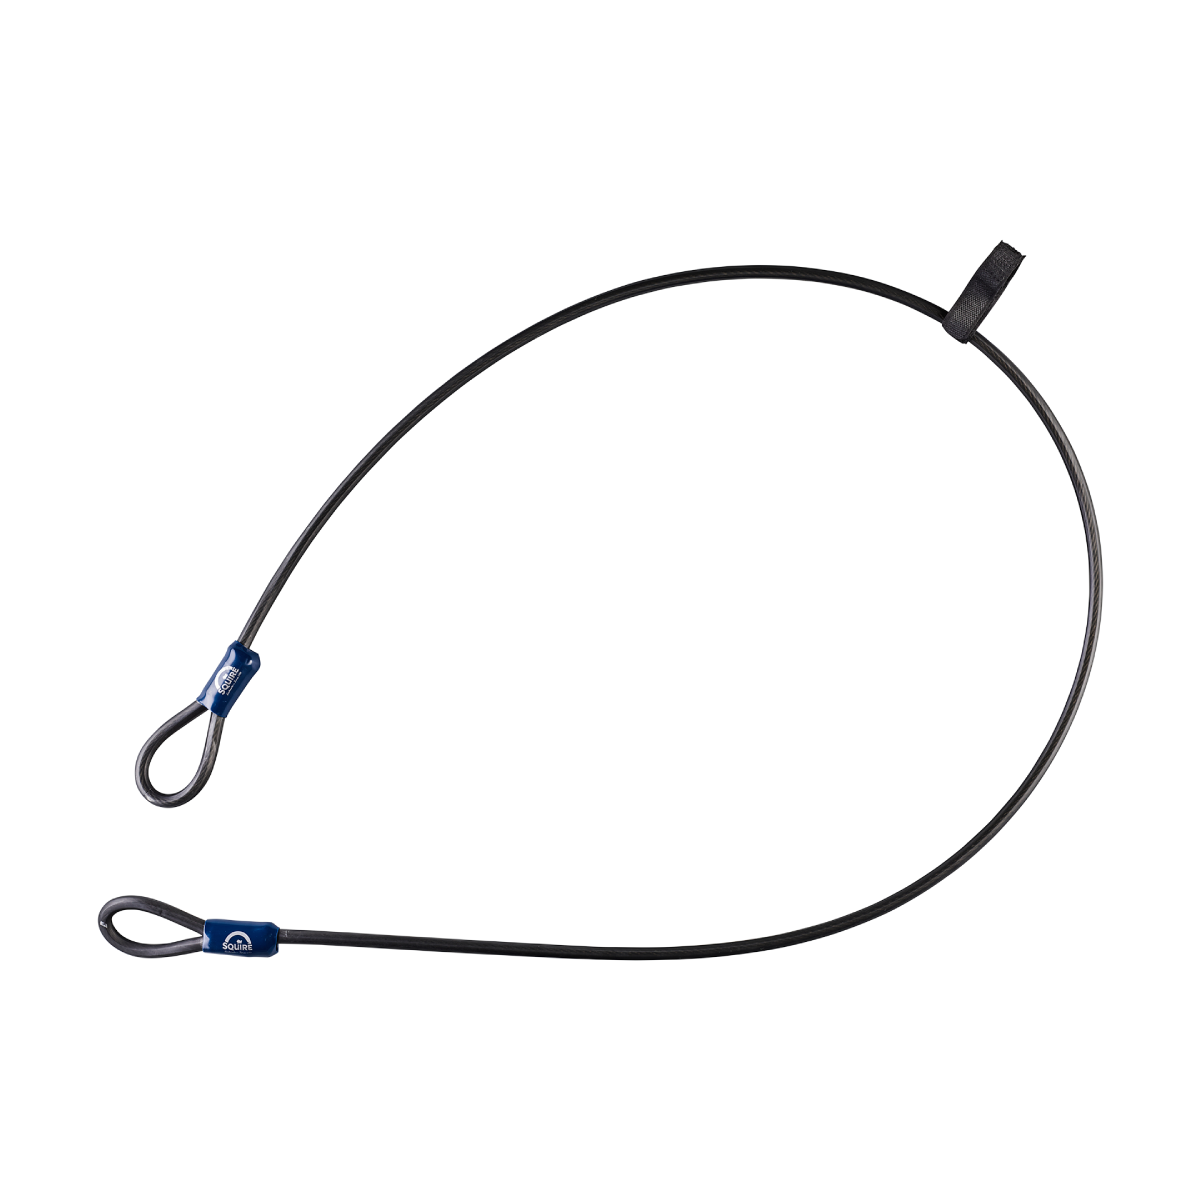 Squire Bicycle Security Cable